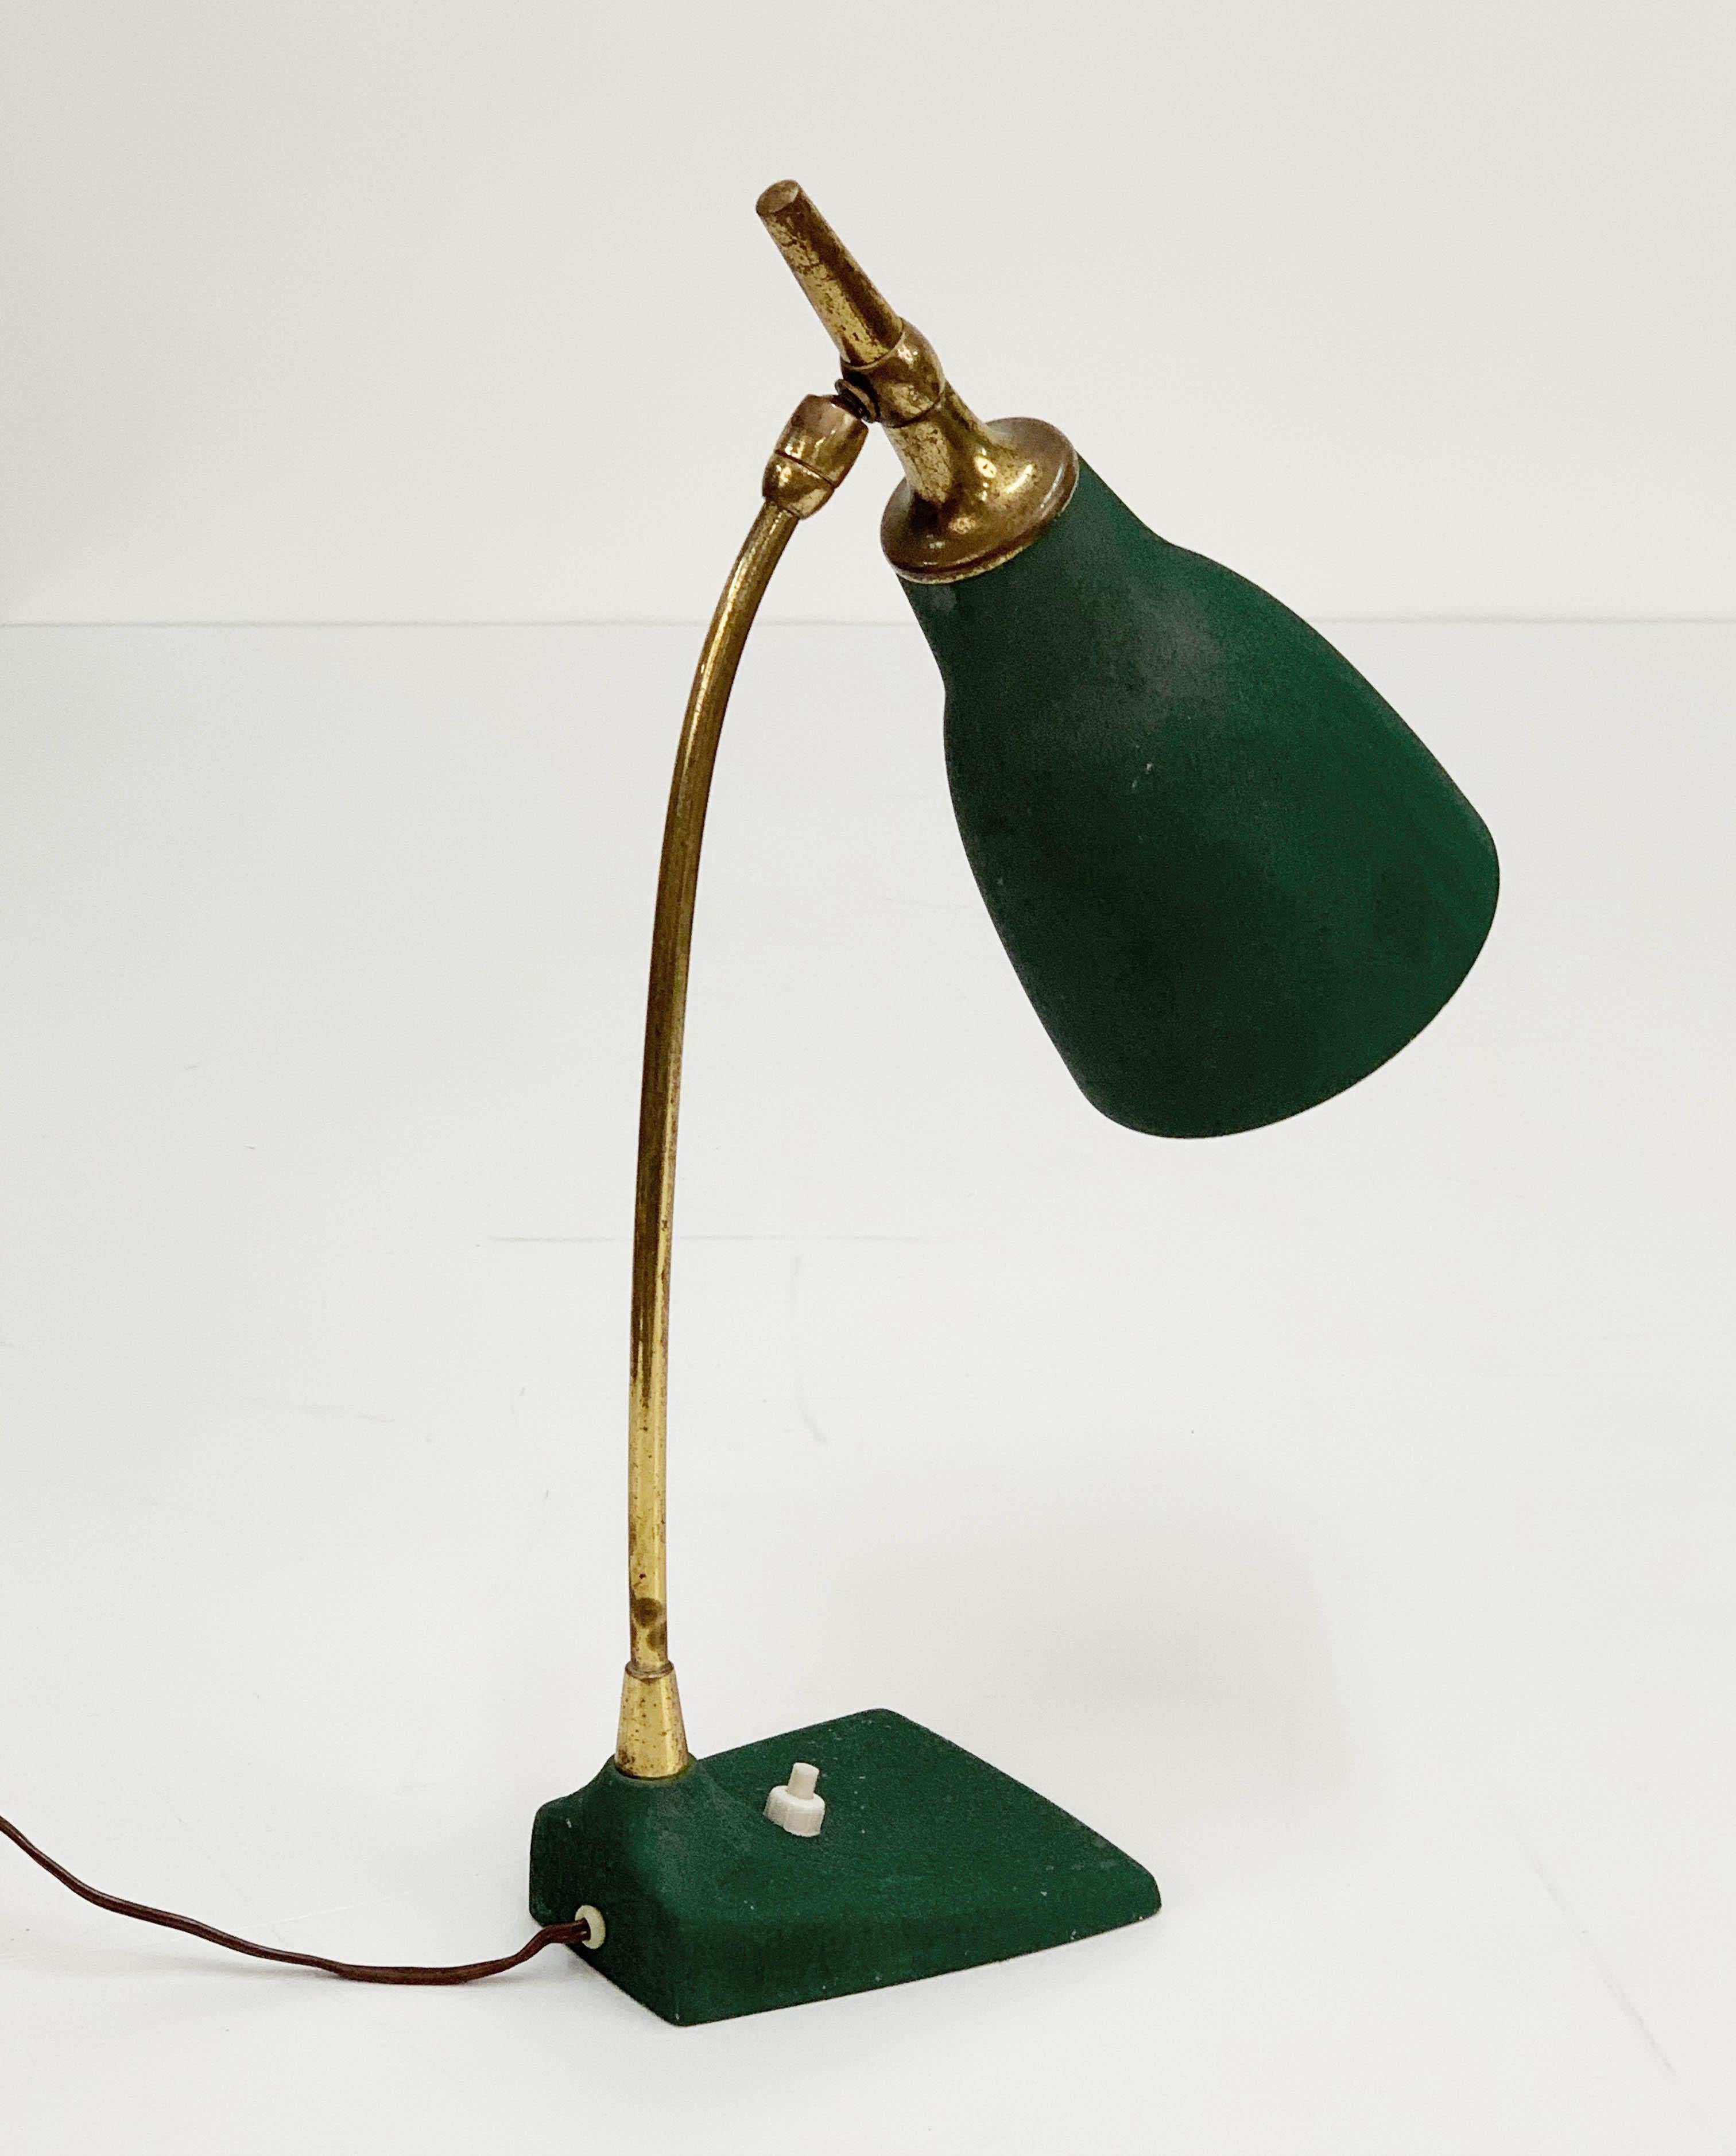 Midcentury Gebrüder Cosack Adjustable Green Brass and Cast Iron Table Lamp 1950s For Sale 7